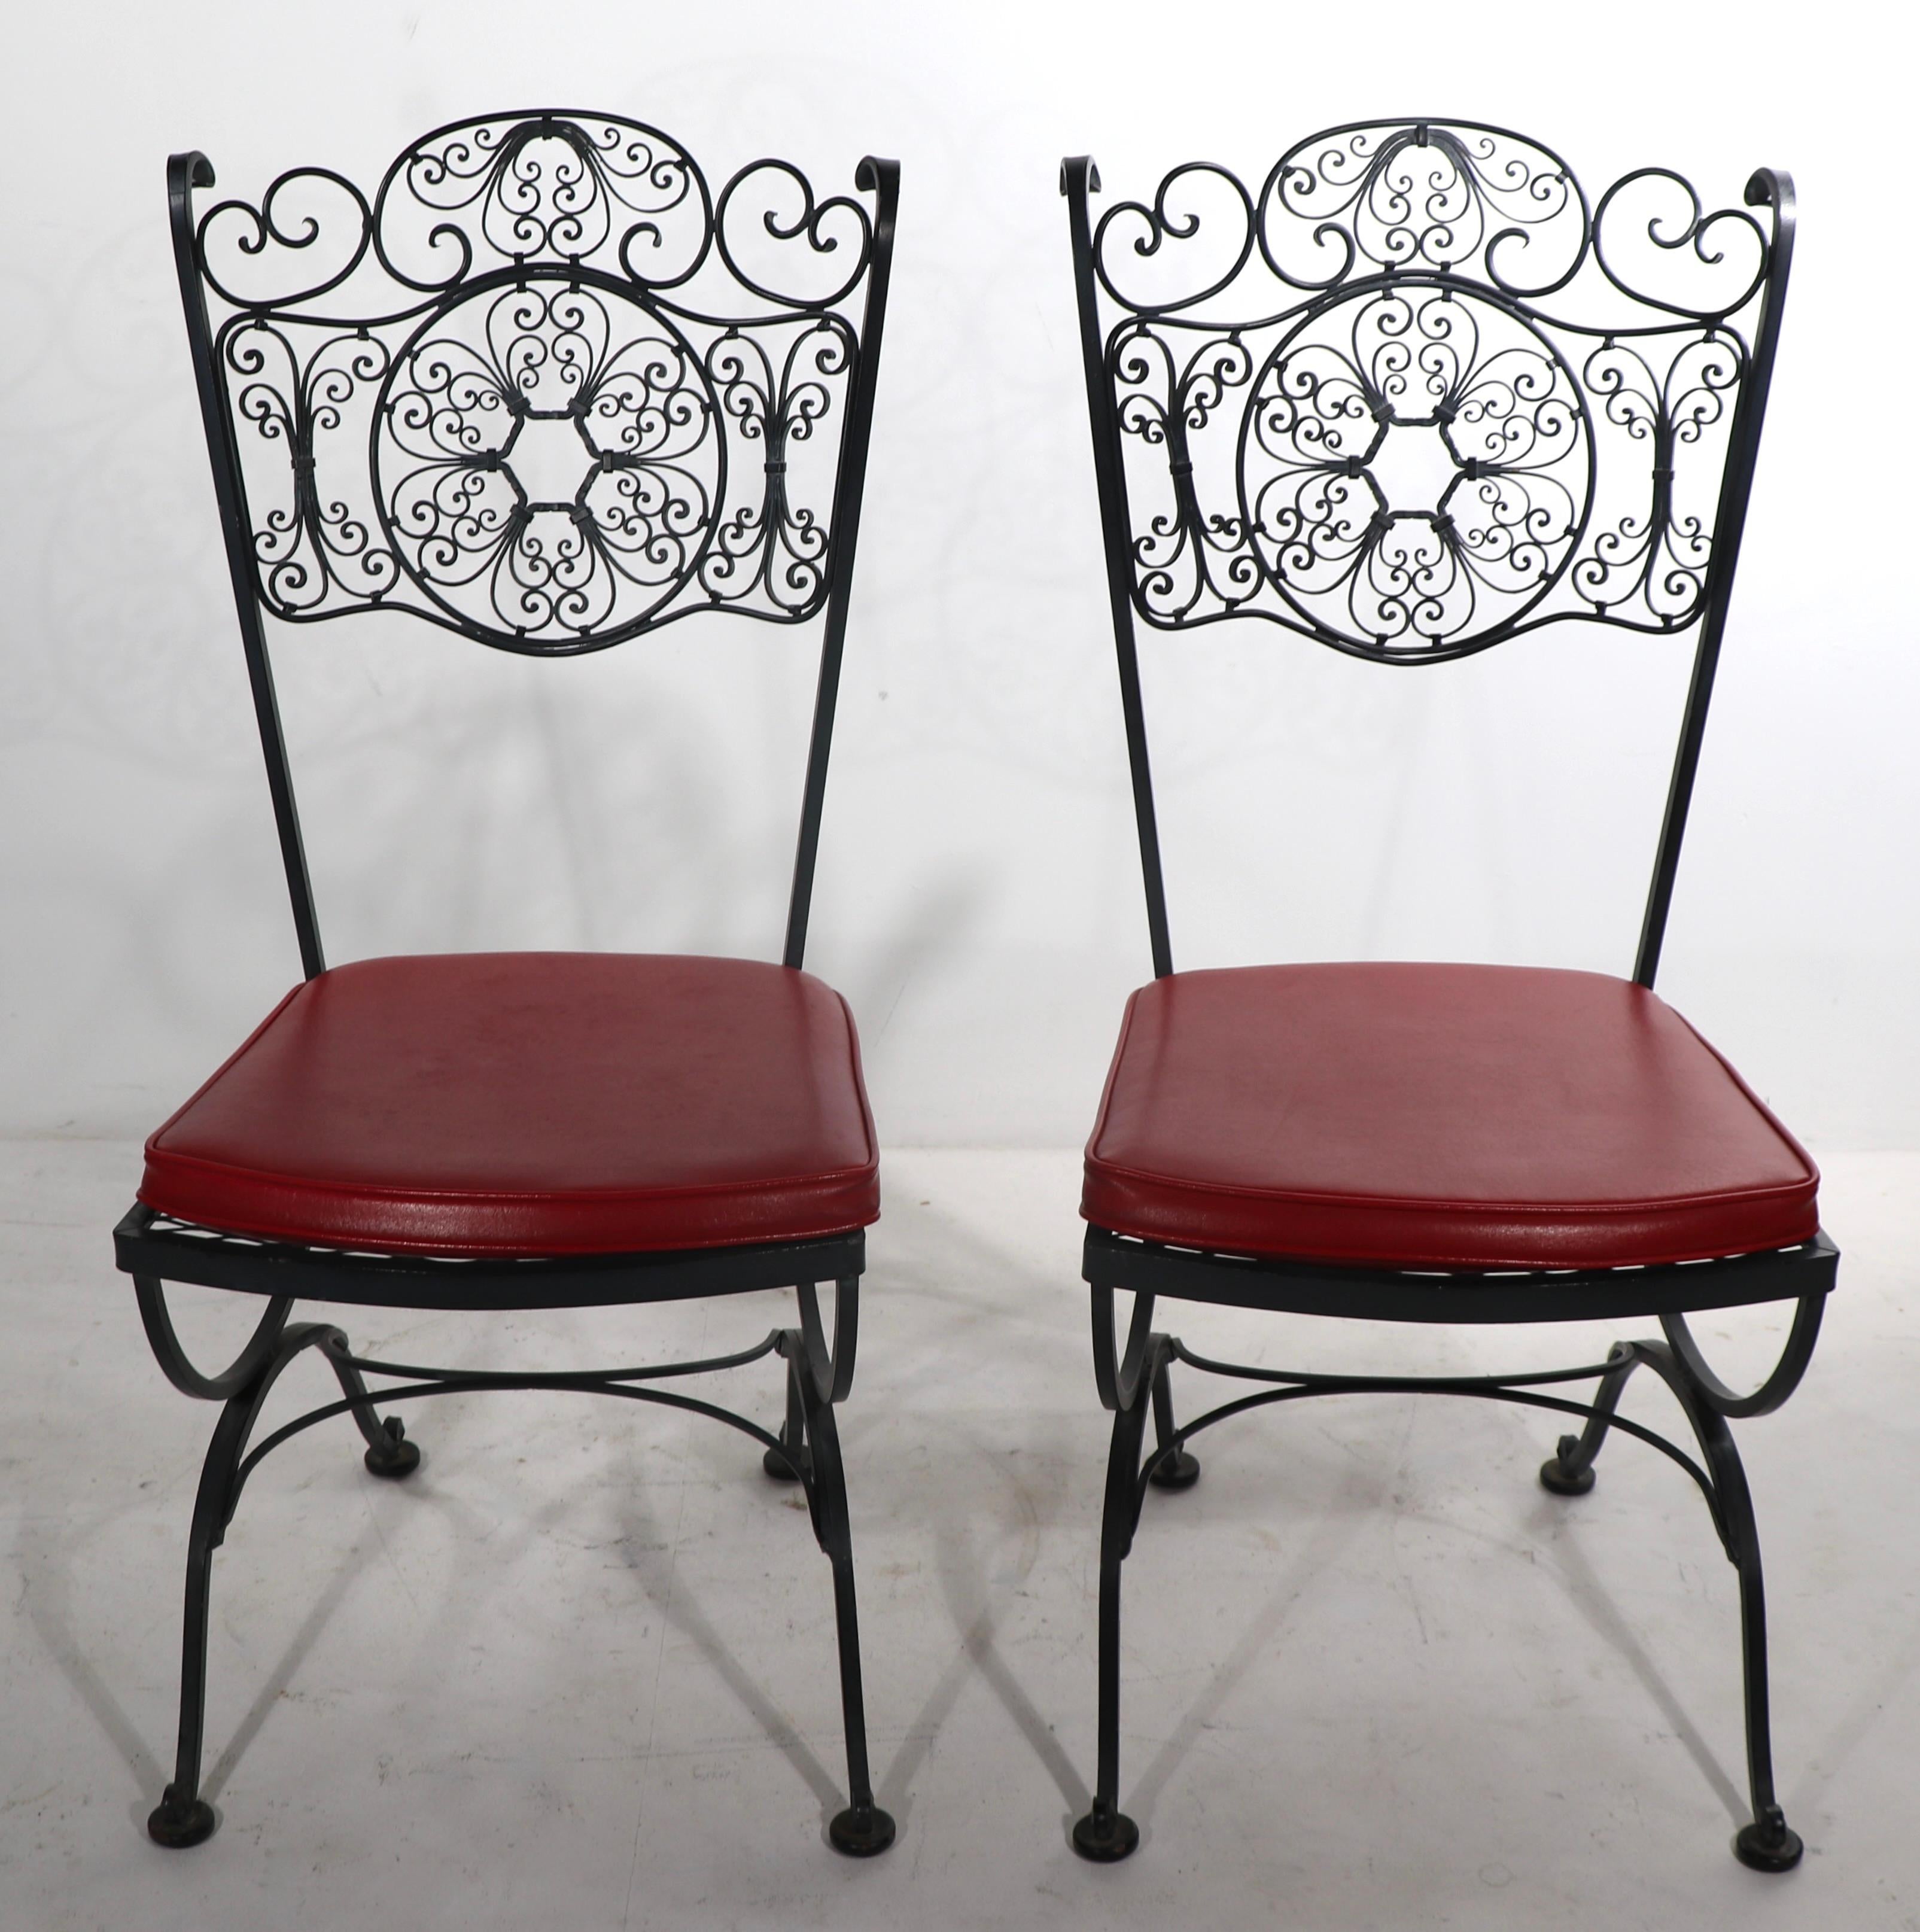 American Pr. Ornate Wrought Iron Patio Garden Dining Chairs by Lee Woodard For Sale